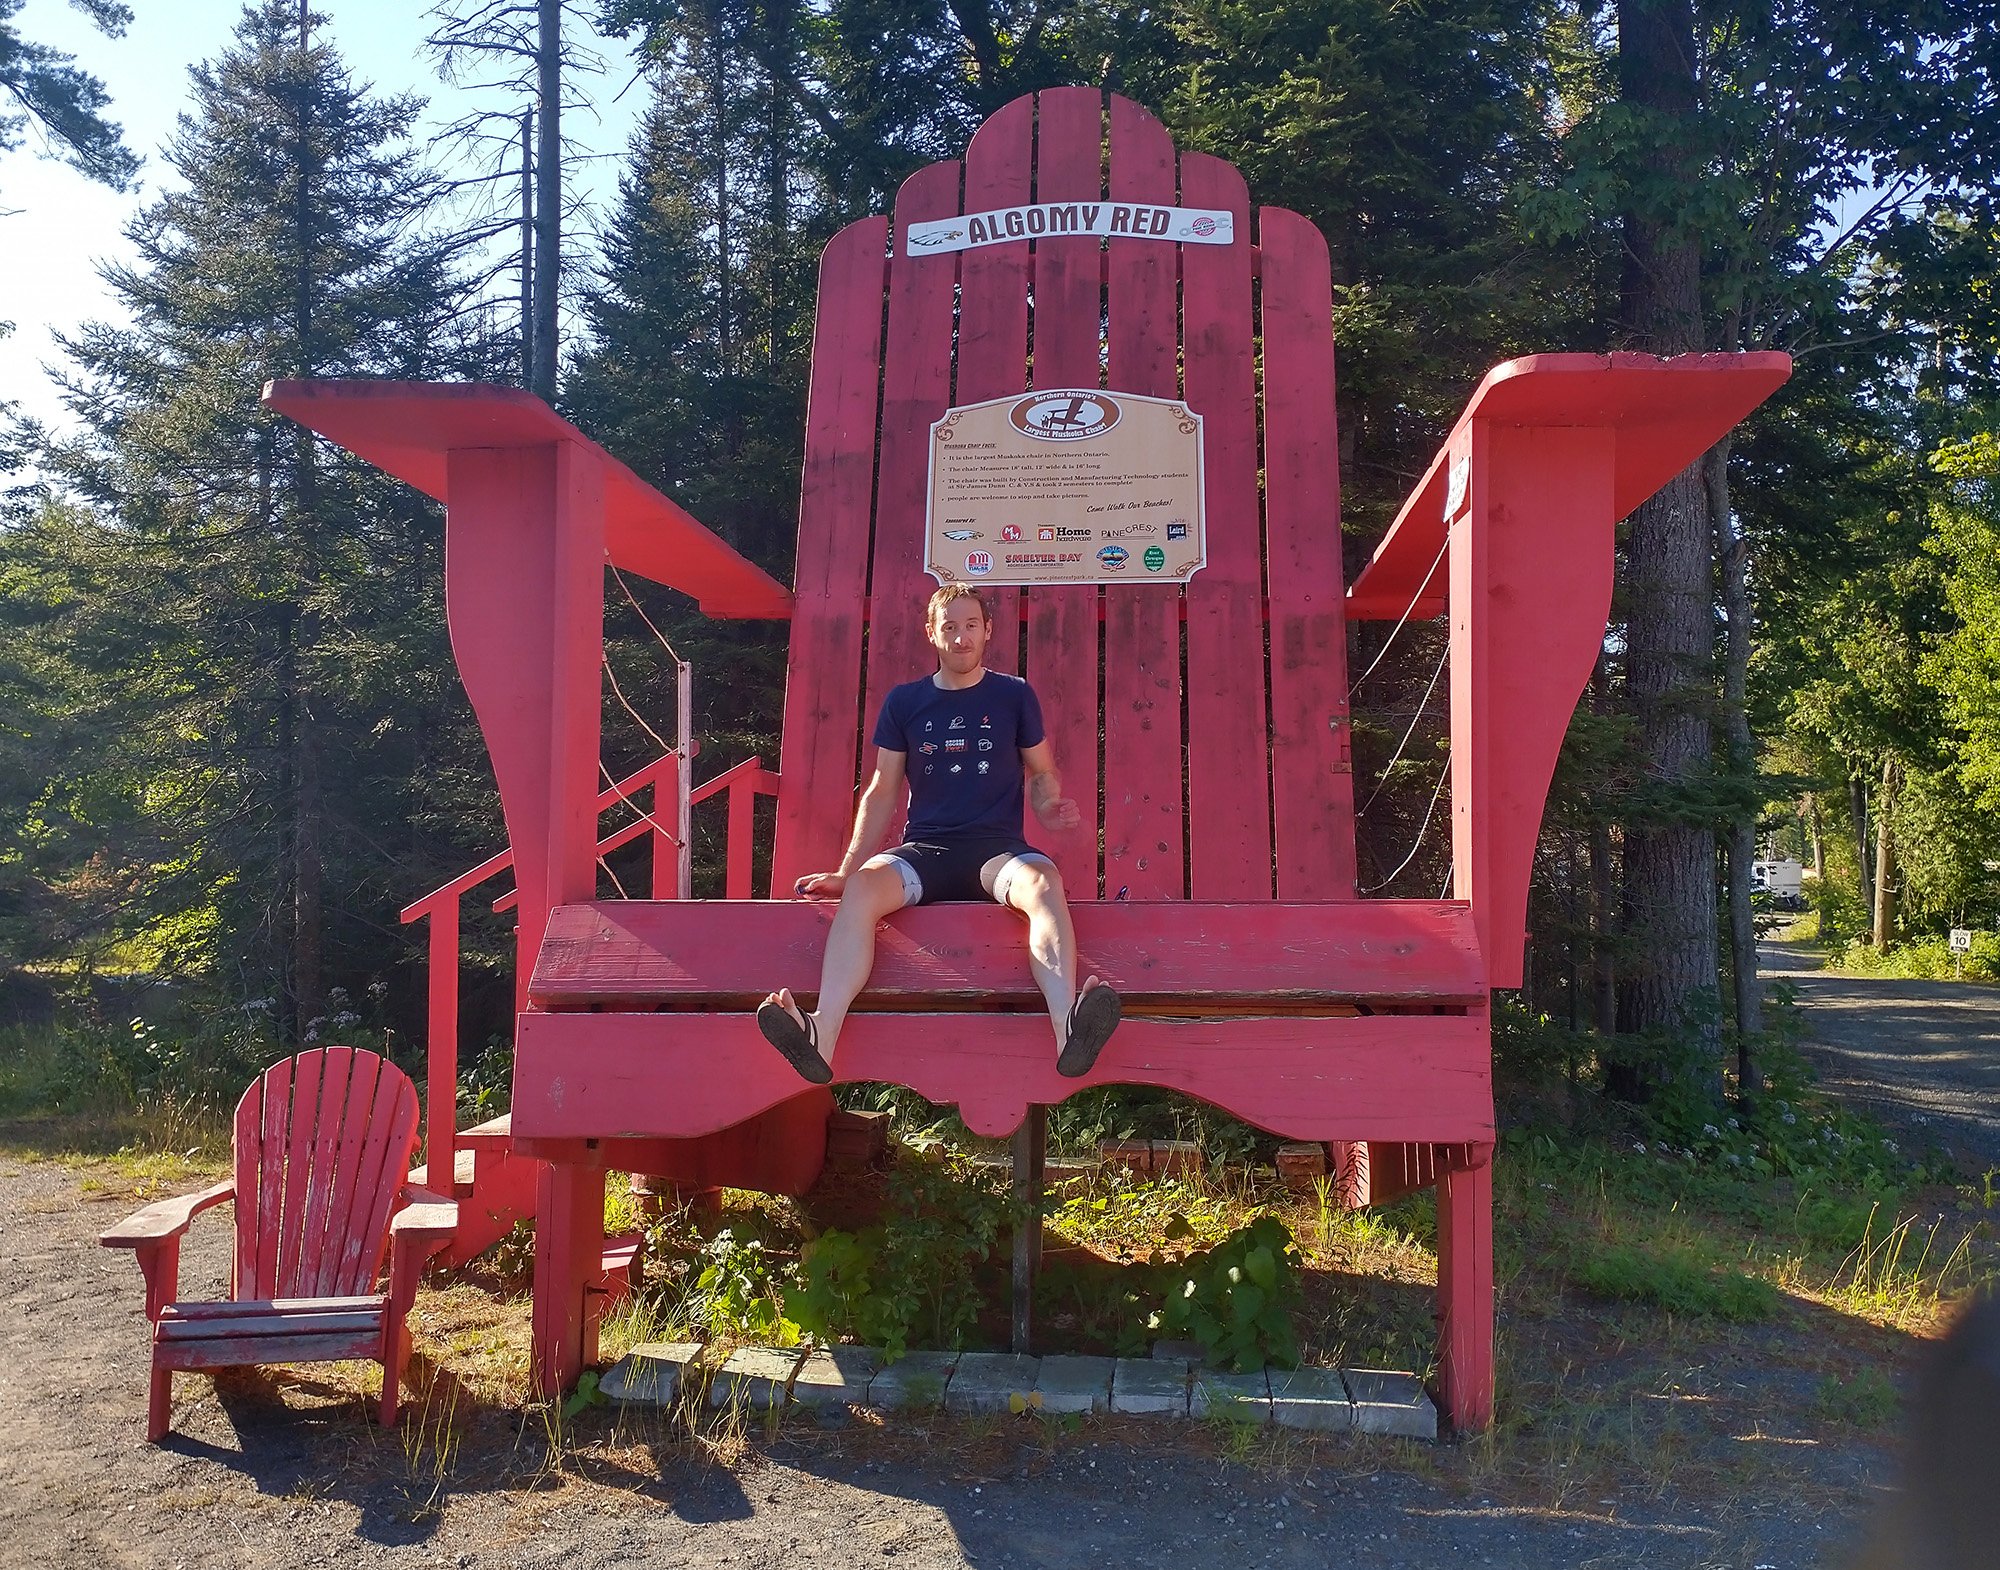 Northern Ontario's Biggest Muskoka Chair. I guess. At least now I know what those endless amounts of uncomfortable wooden chairs are.